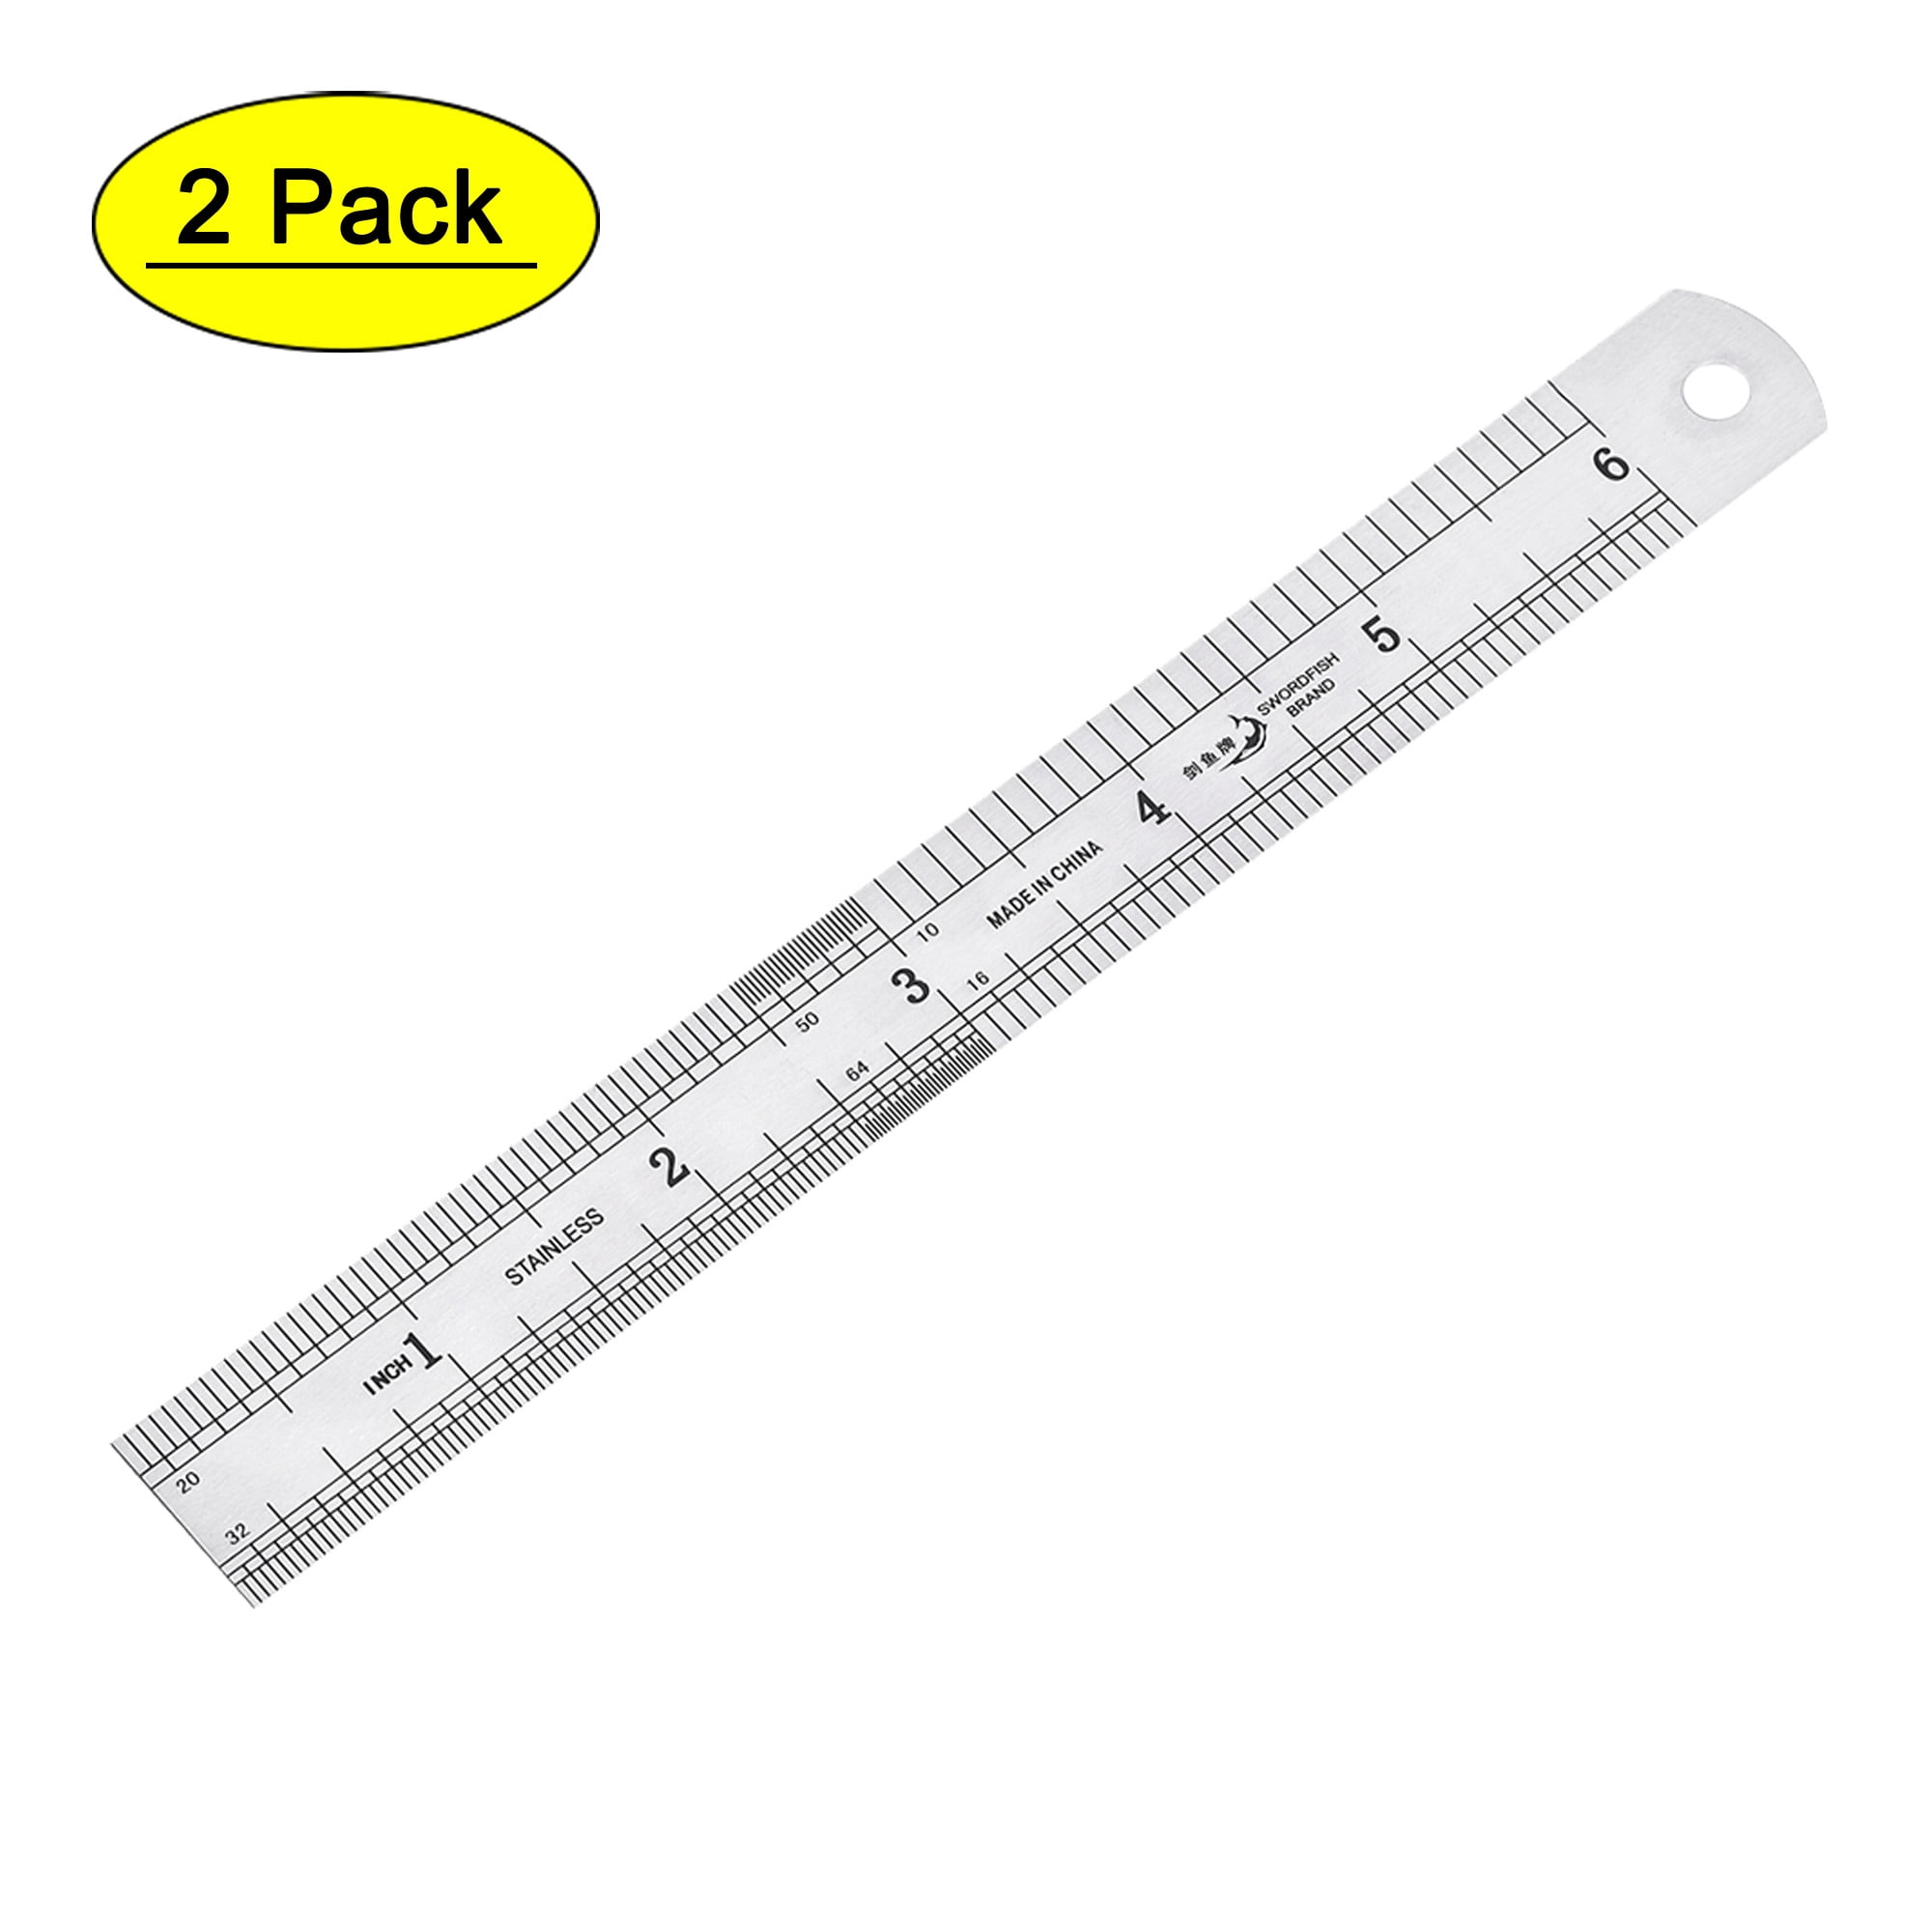 6 inch / 15 cm Stainless Steel Metal Straight Ruler Precision BUY